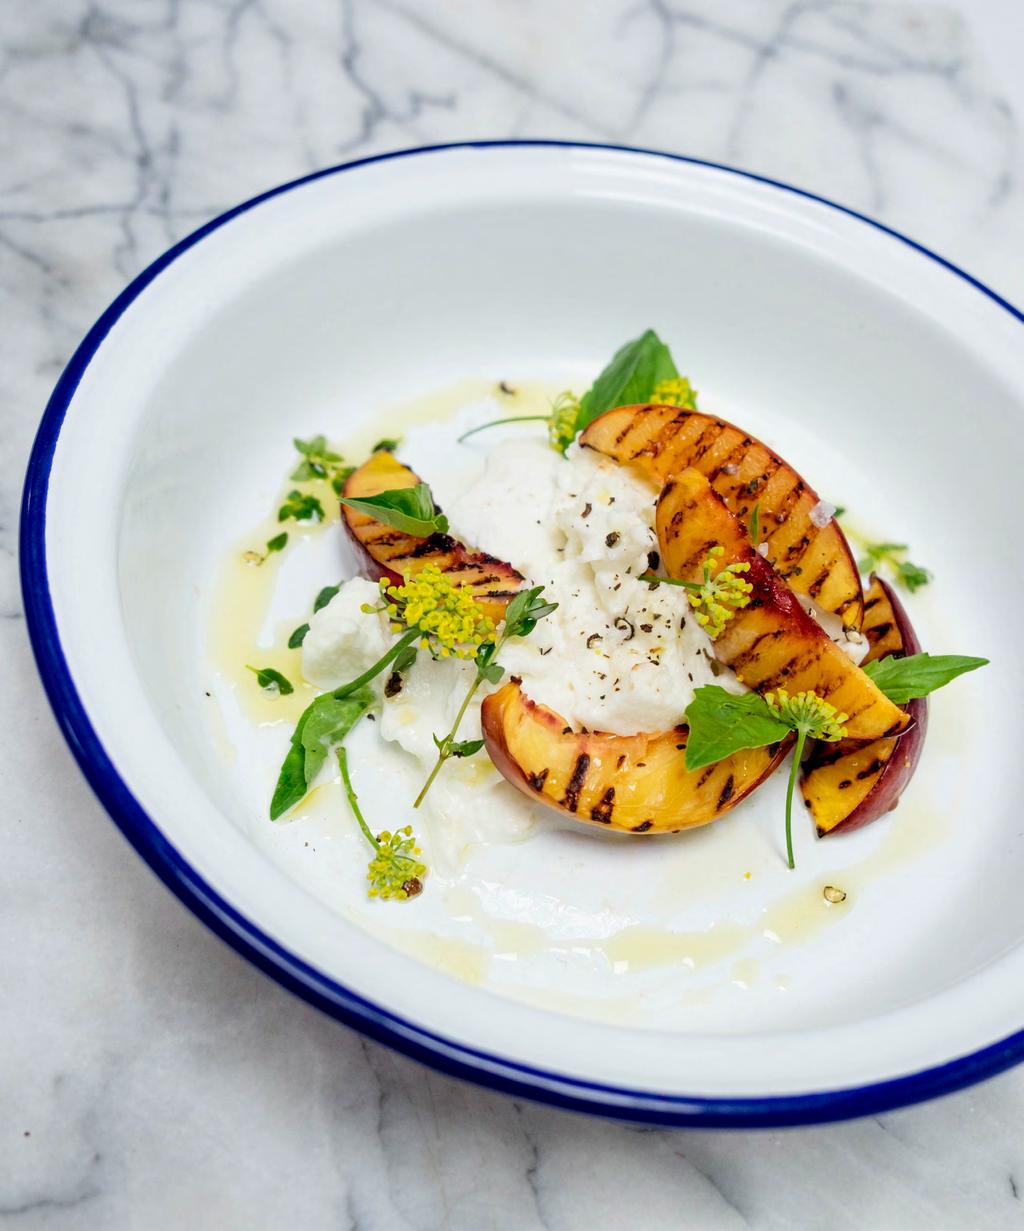 SUMMER MENU STARTERS Burrata with grilled peach and fresh herbs Citrus crab salad with brown crab mayonnaise and sourdough Bresaola, ricotta and rocket with a blackberry dressing MAINS Spring green